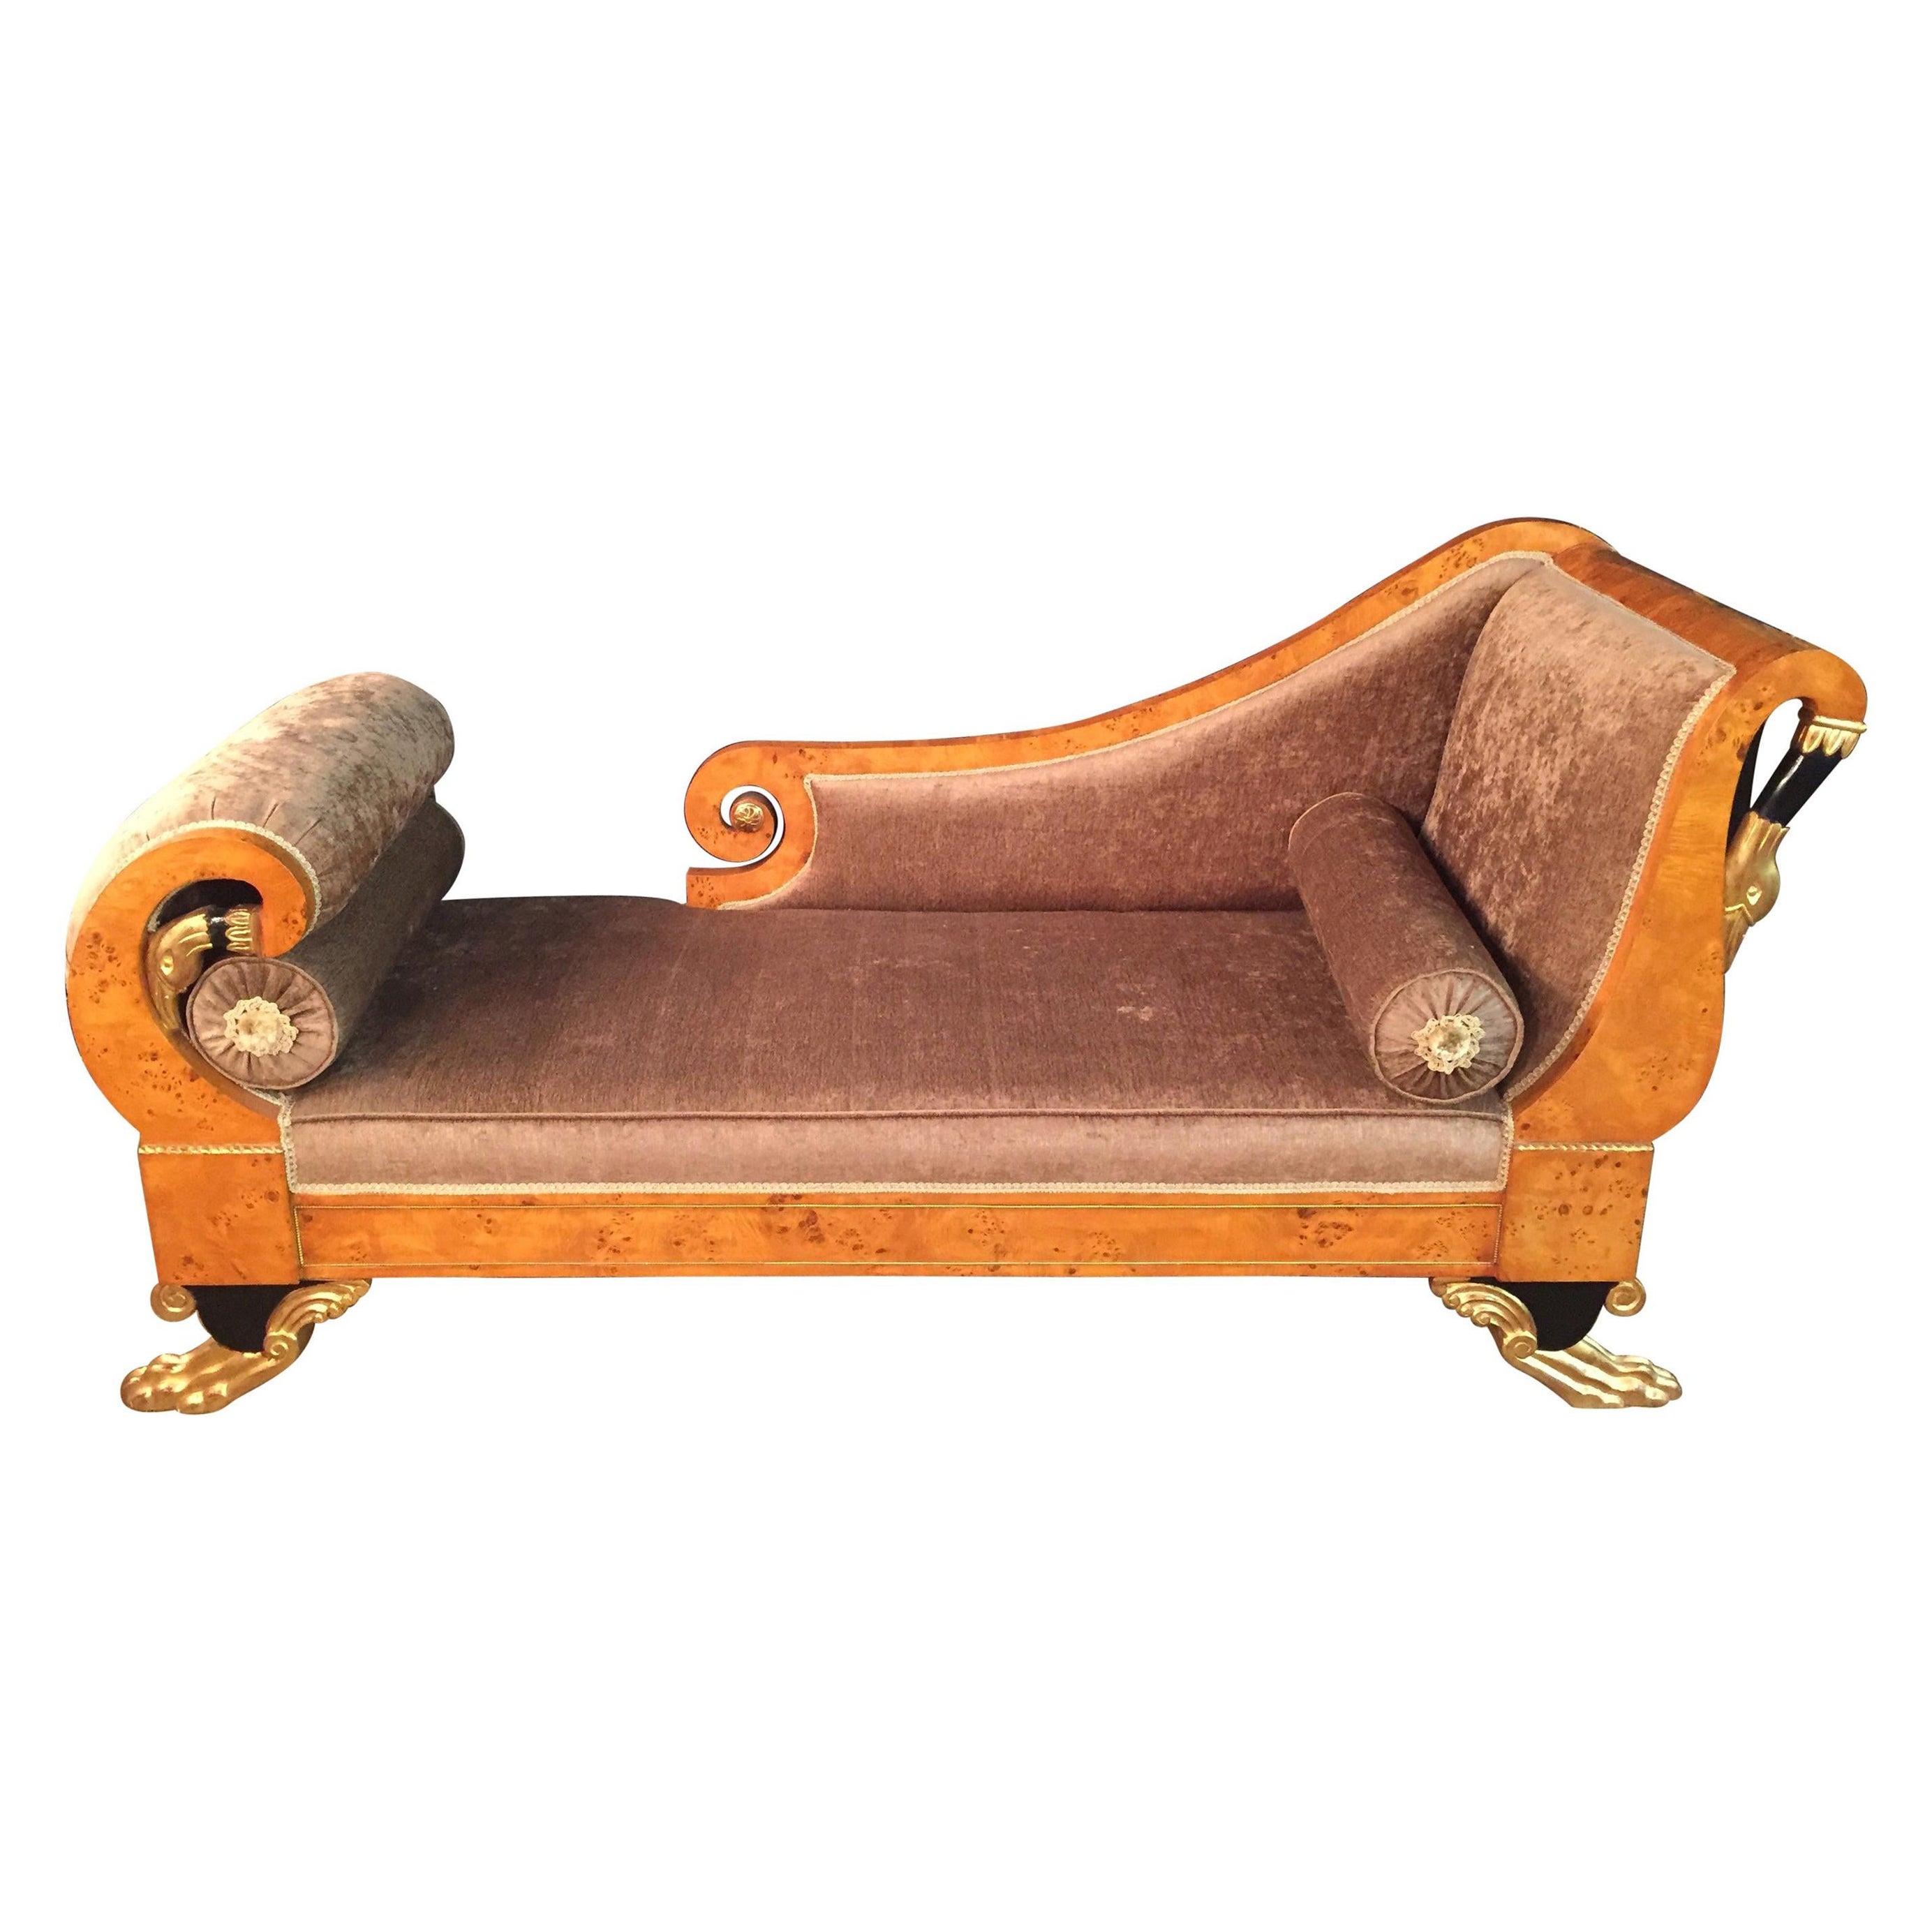 20th Century Antique Classizim Style Empire Swan Chaise Lounge Birdseye Maple For Sale